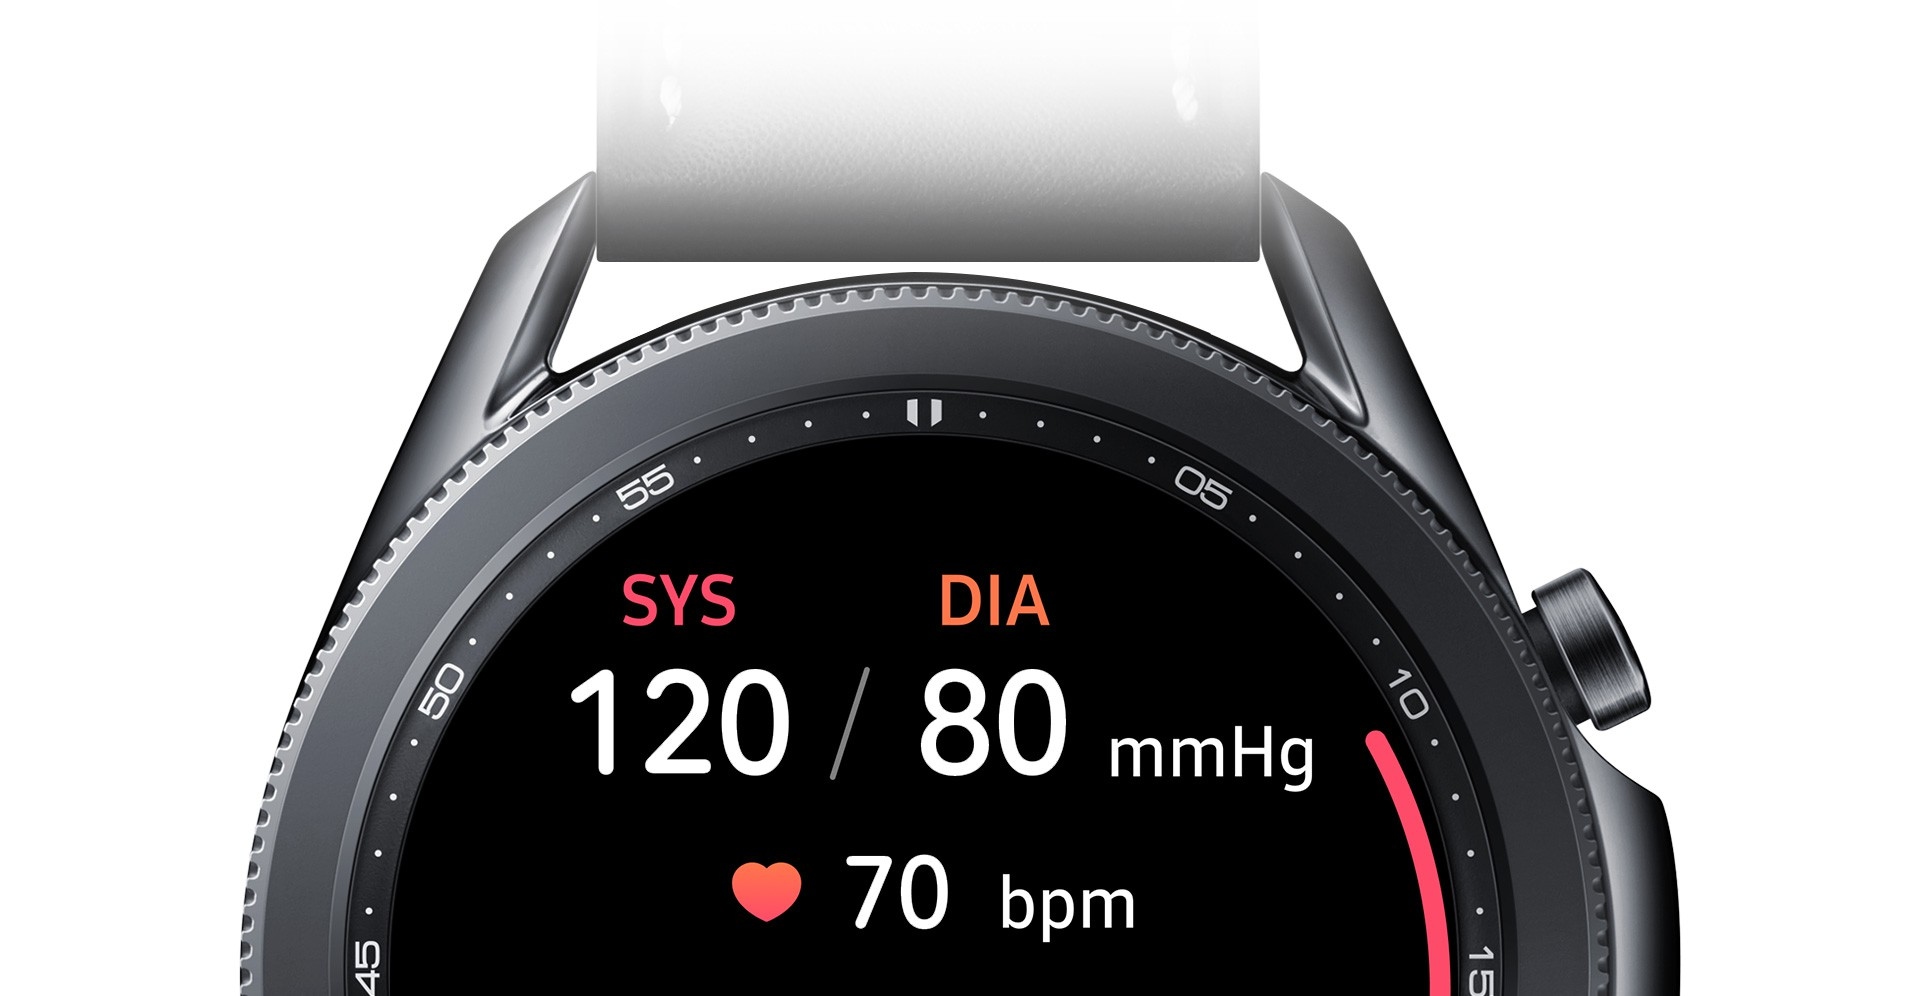 Partial front view of a 45mm Galaxy Watch3 in Mystic Black, showing blood pressure measurement GUI on its watch face.